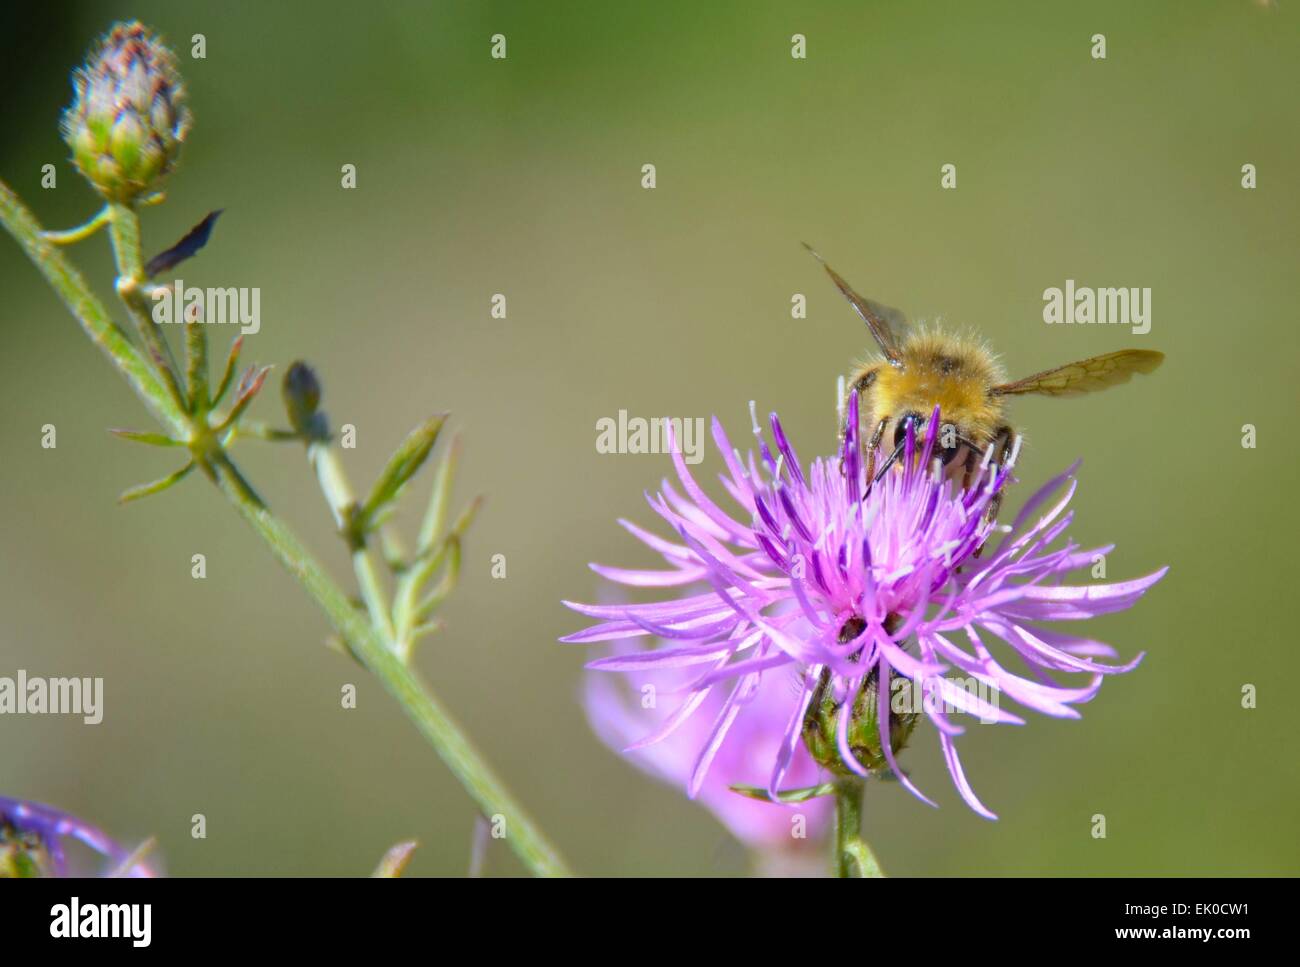 Honey bee collecting pollen from a flower / weed Stock Photo